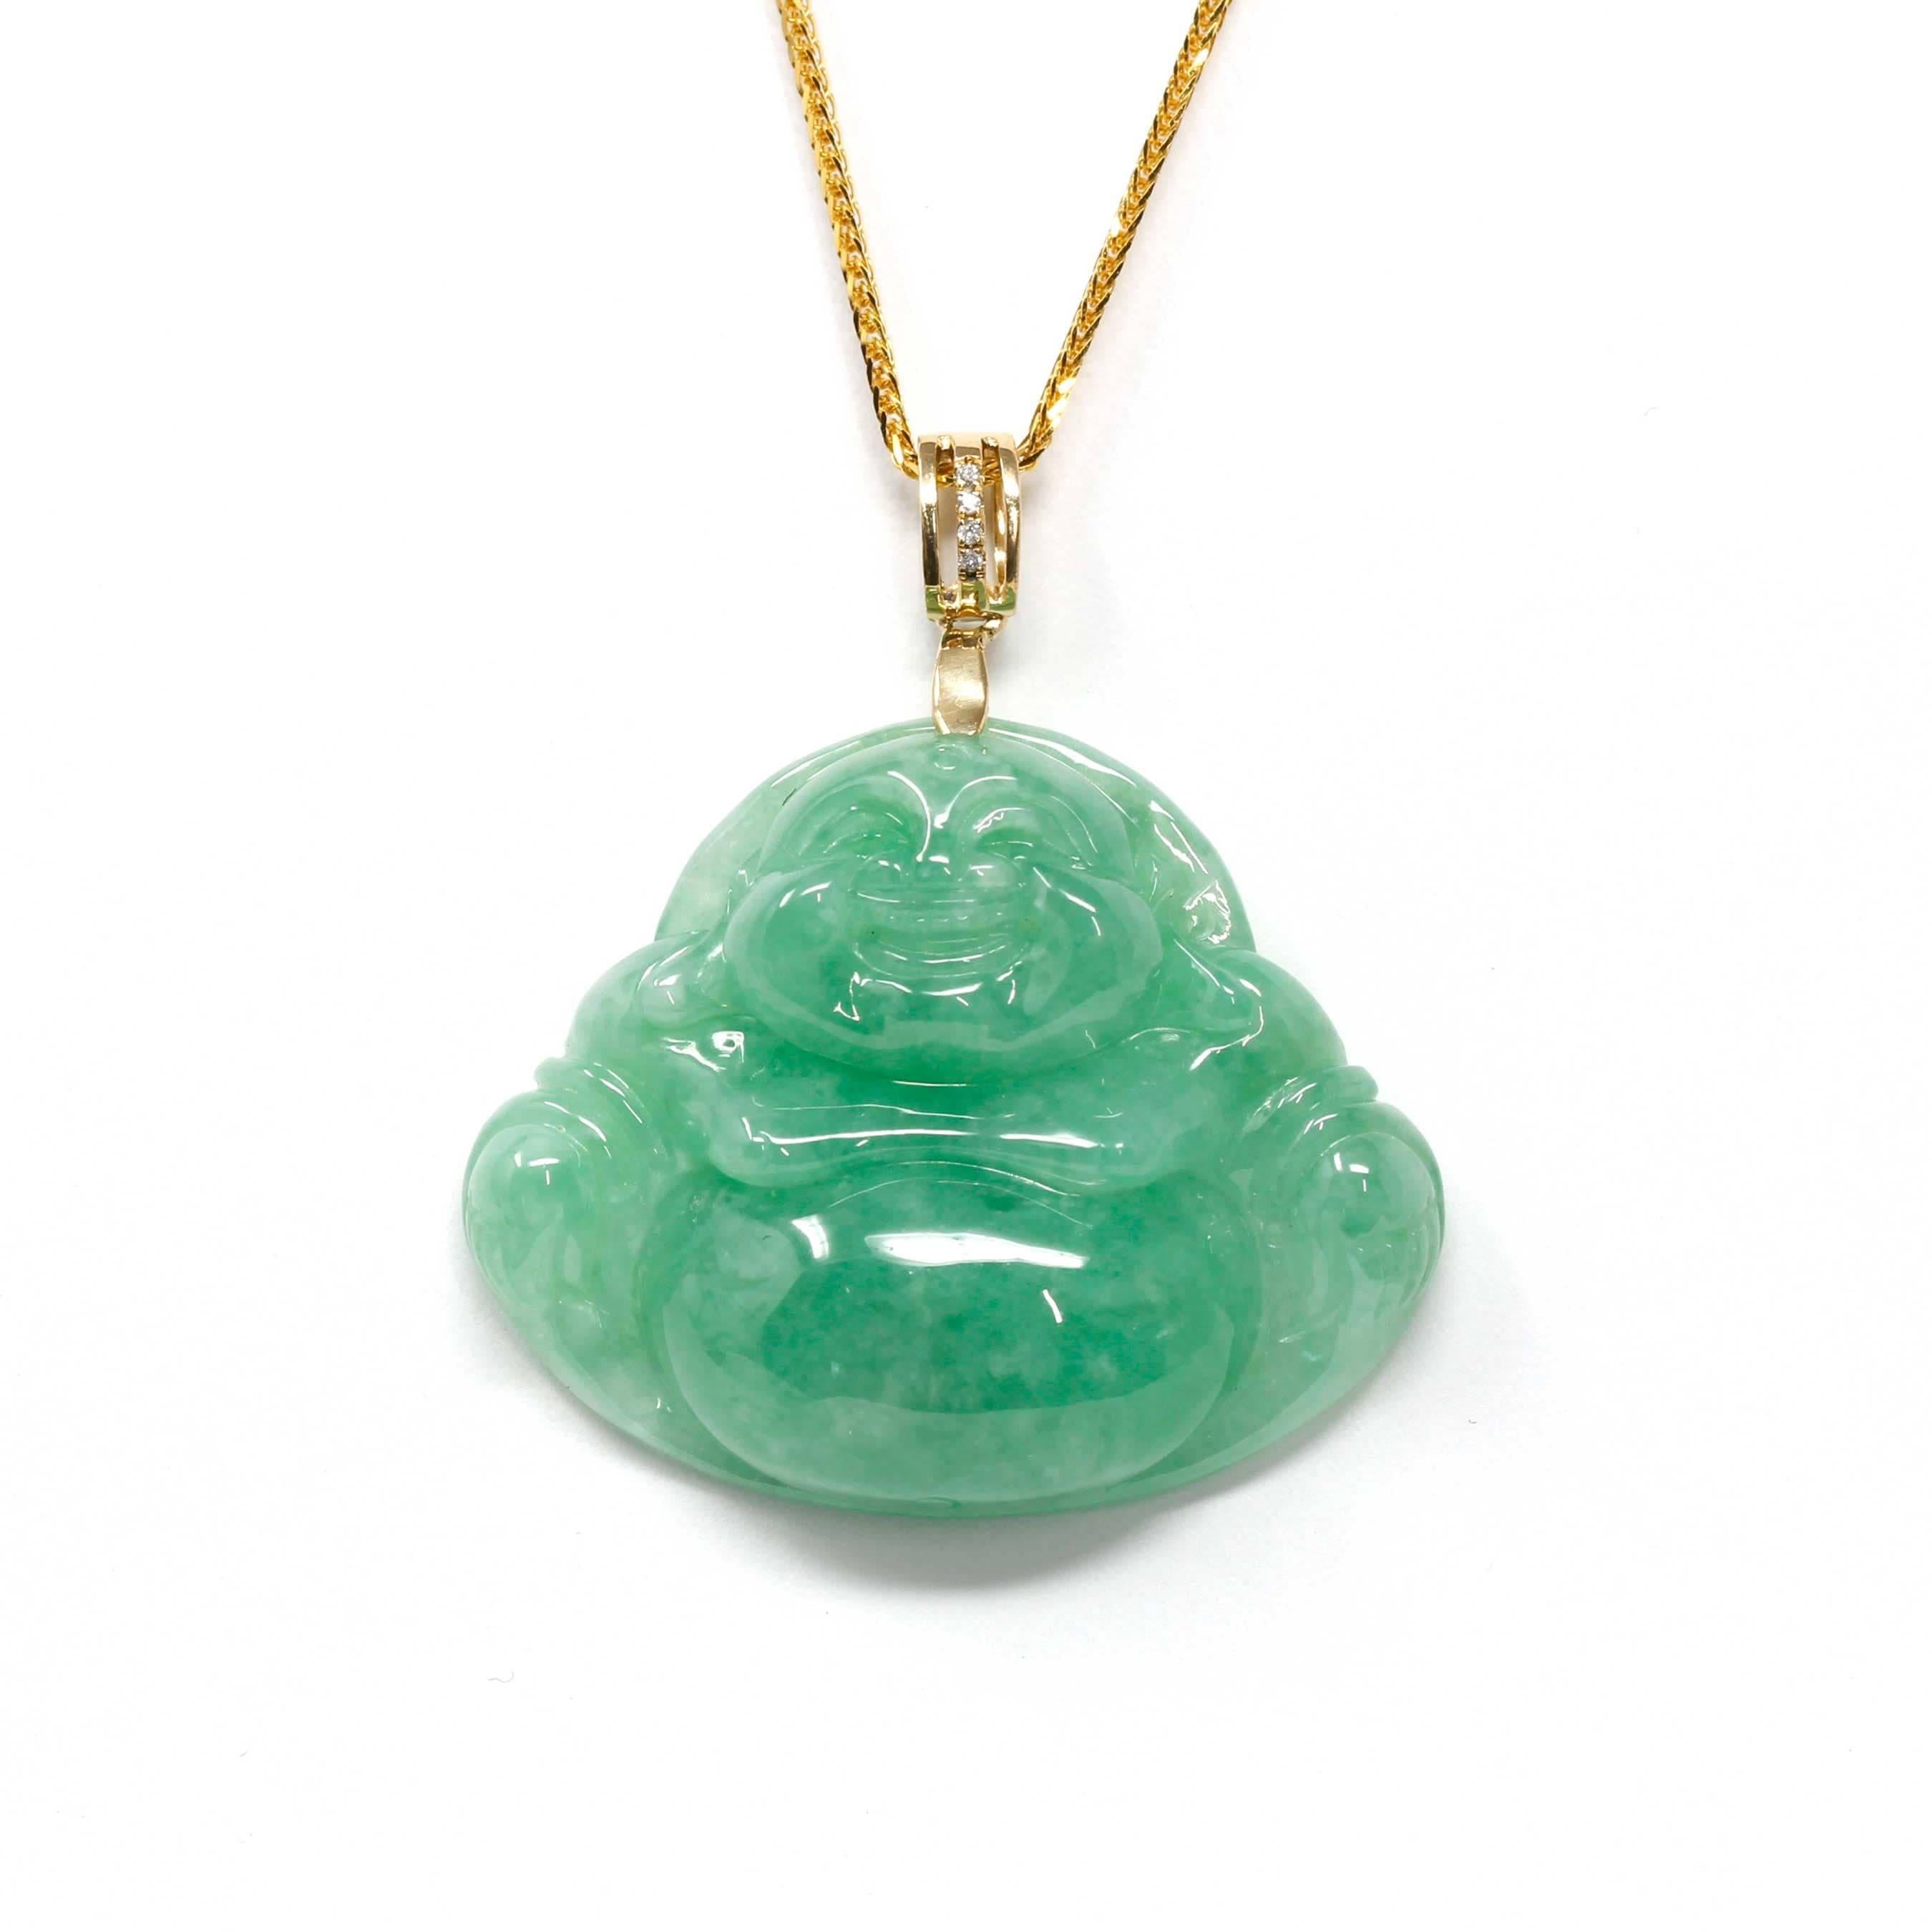 * DETAIL---One of a kind jadeite Buddha necklace, inspired by the figure of the traditional Buddha body. Combined with a modern diamond pave set bail. The piece is more than perfect for daily wear. Wearing items bearing the image of Buddha can